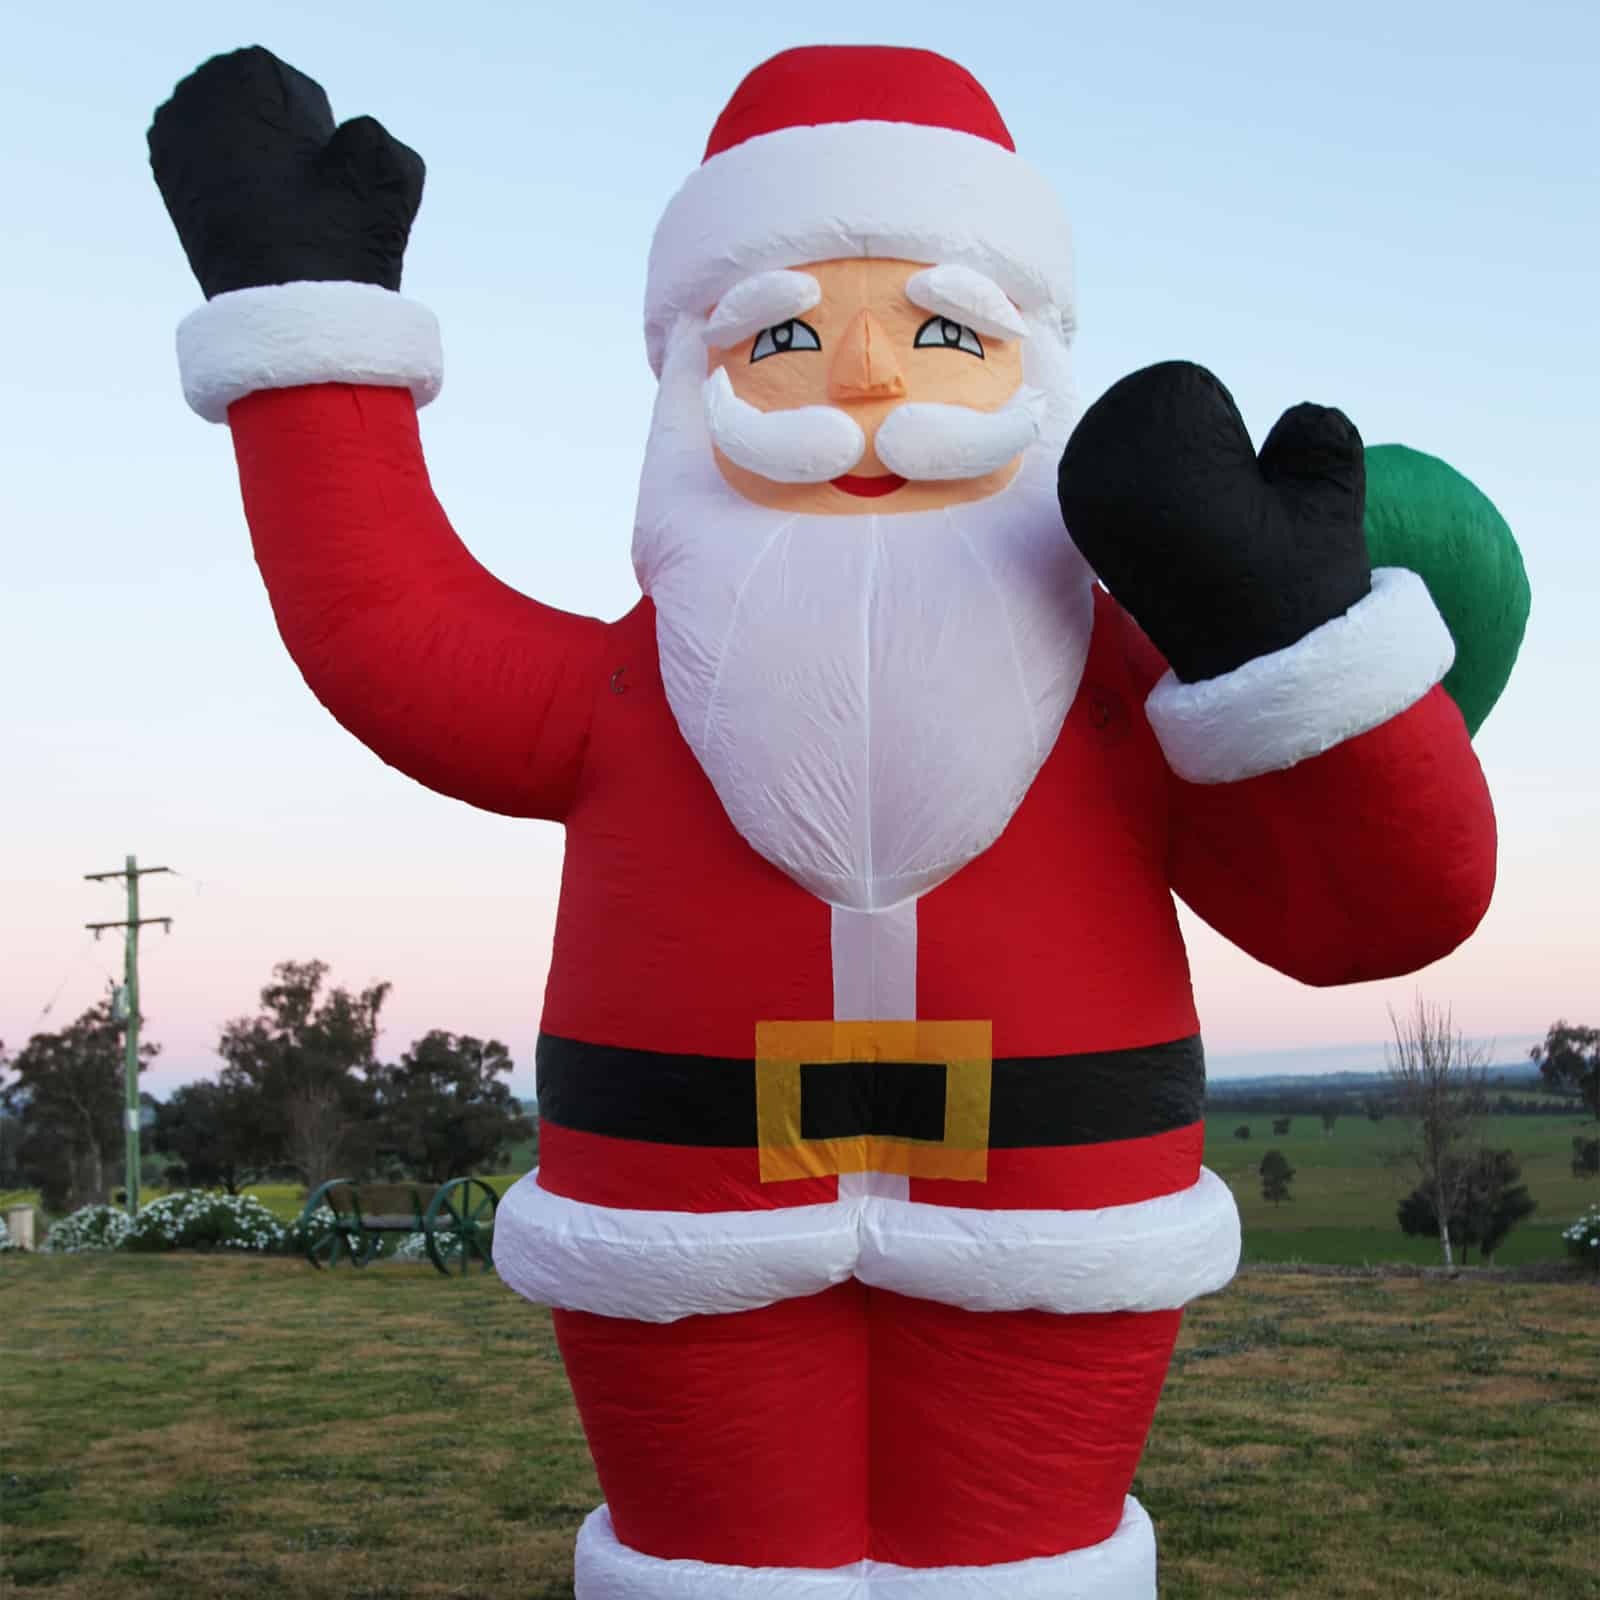 10M Giant Christmas Santa Claus Inflatable Outdoor Decoration Amazing 